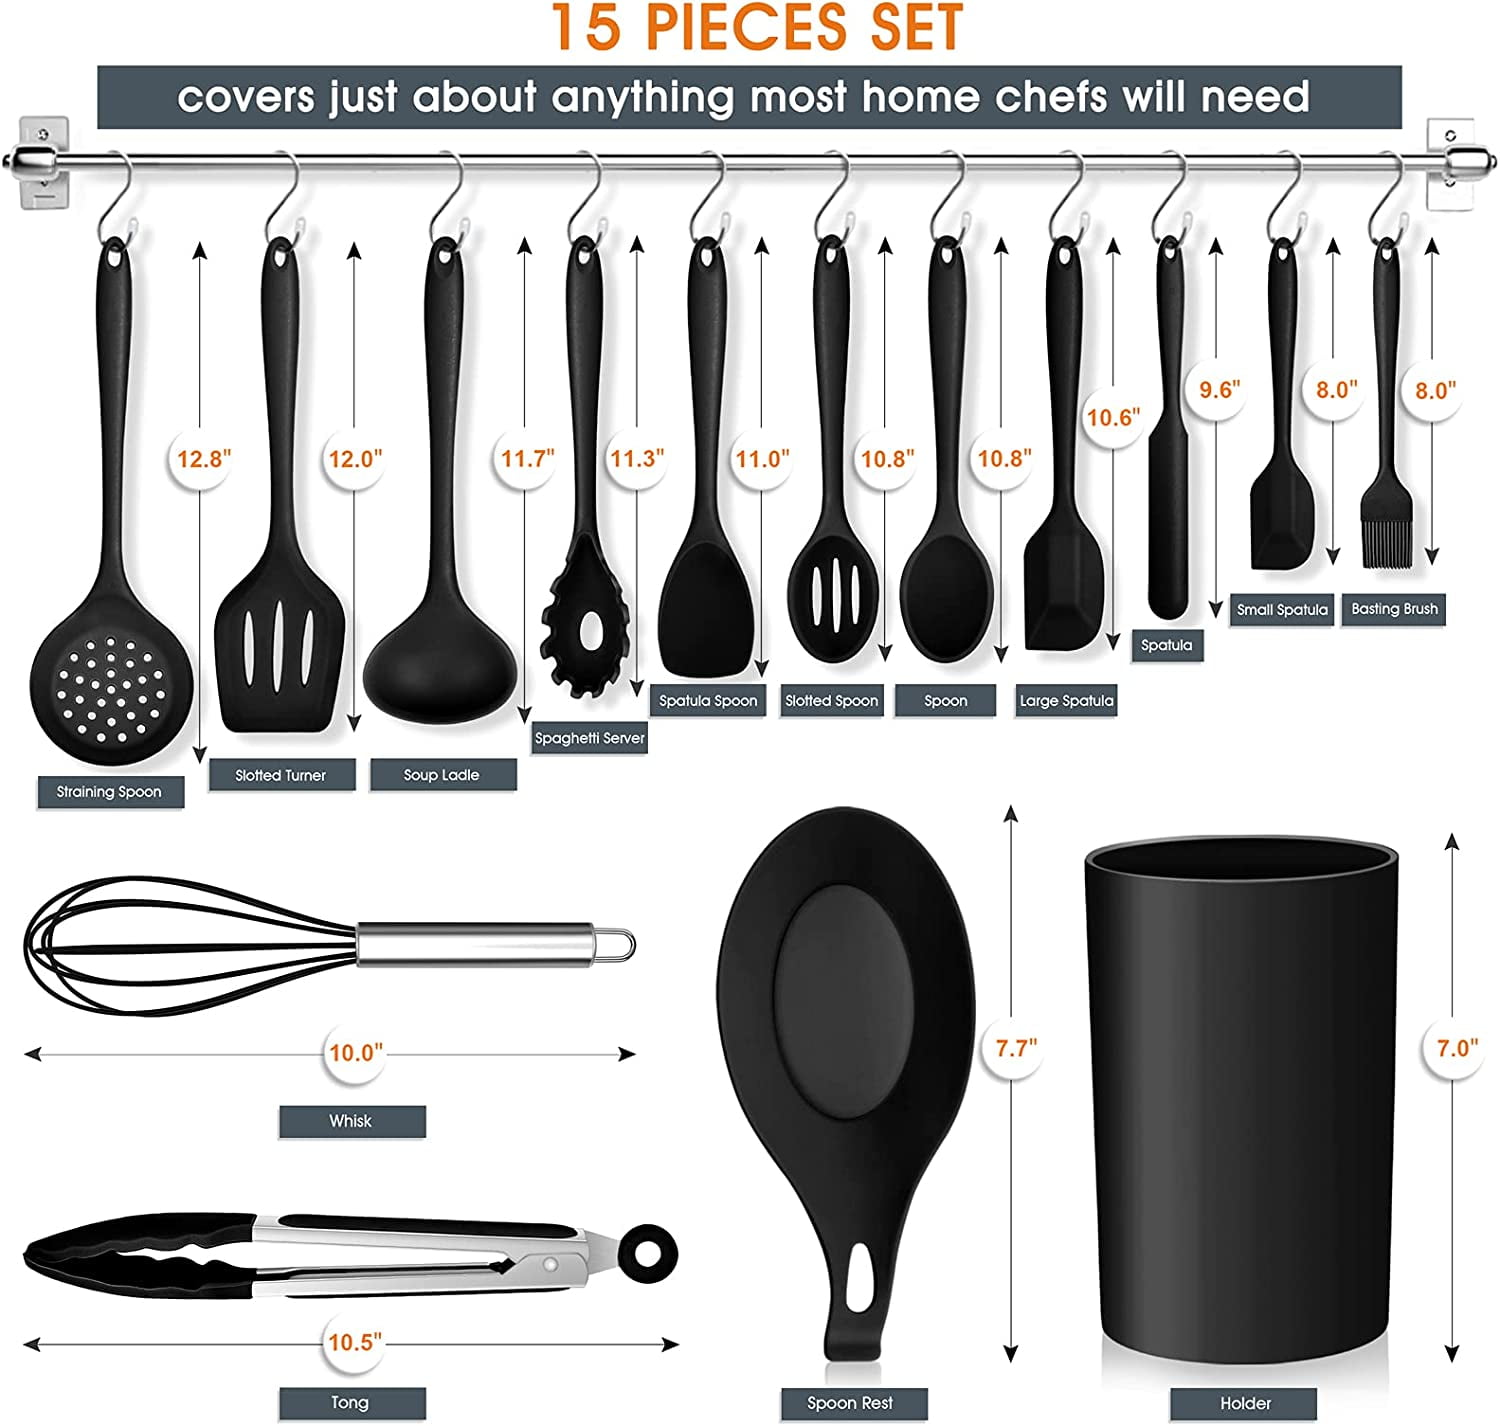 After probably a decade of having mismatched cooking utensils, I final, Kitchen Utensil Set